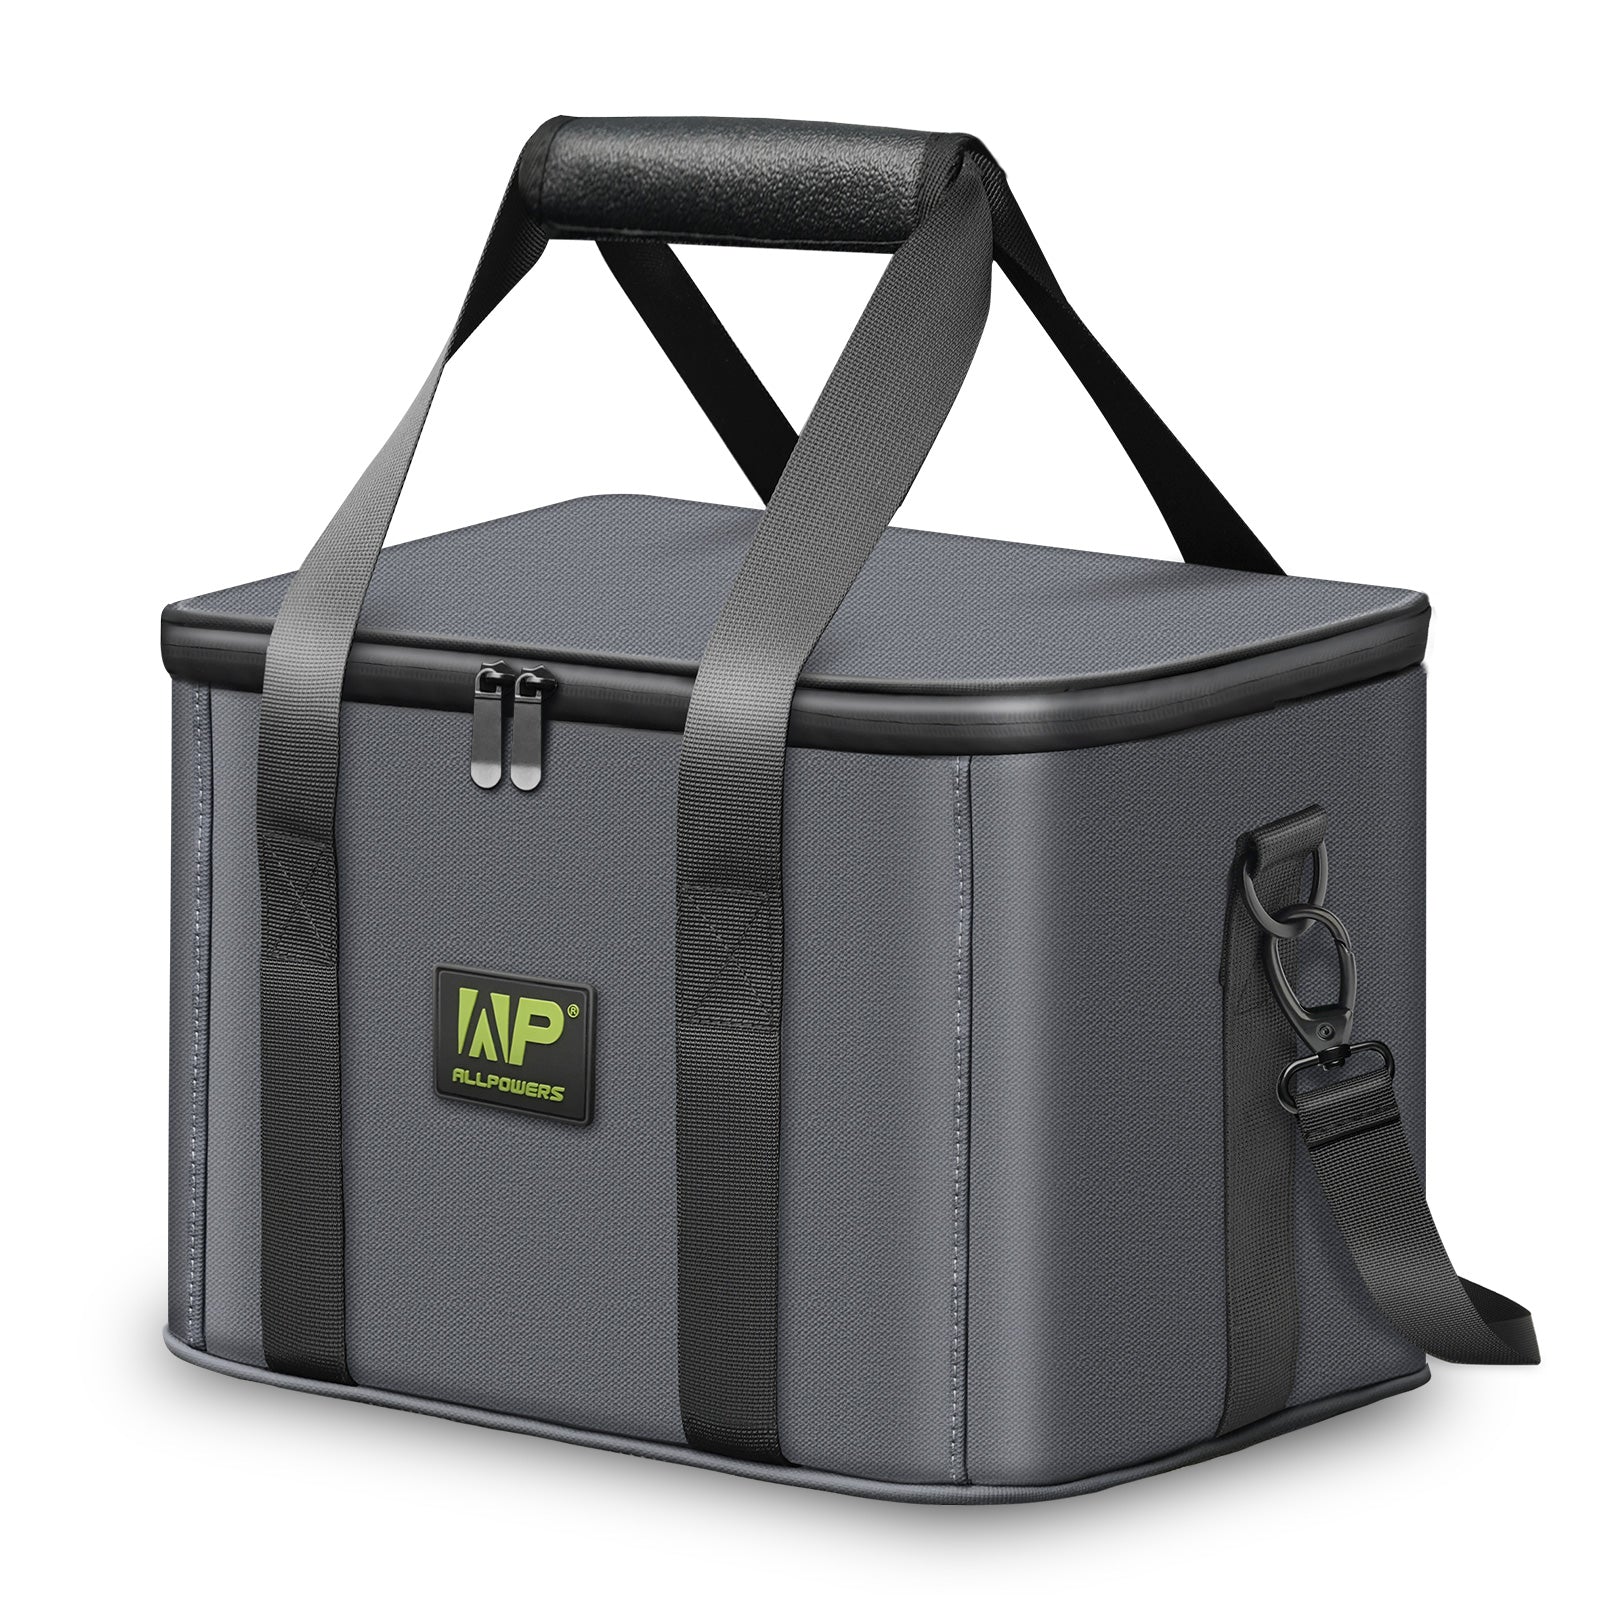 ALLPOWERS R600 Carry Case